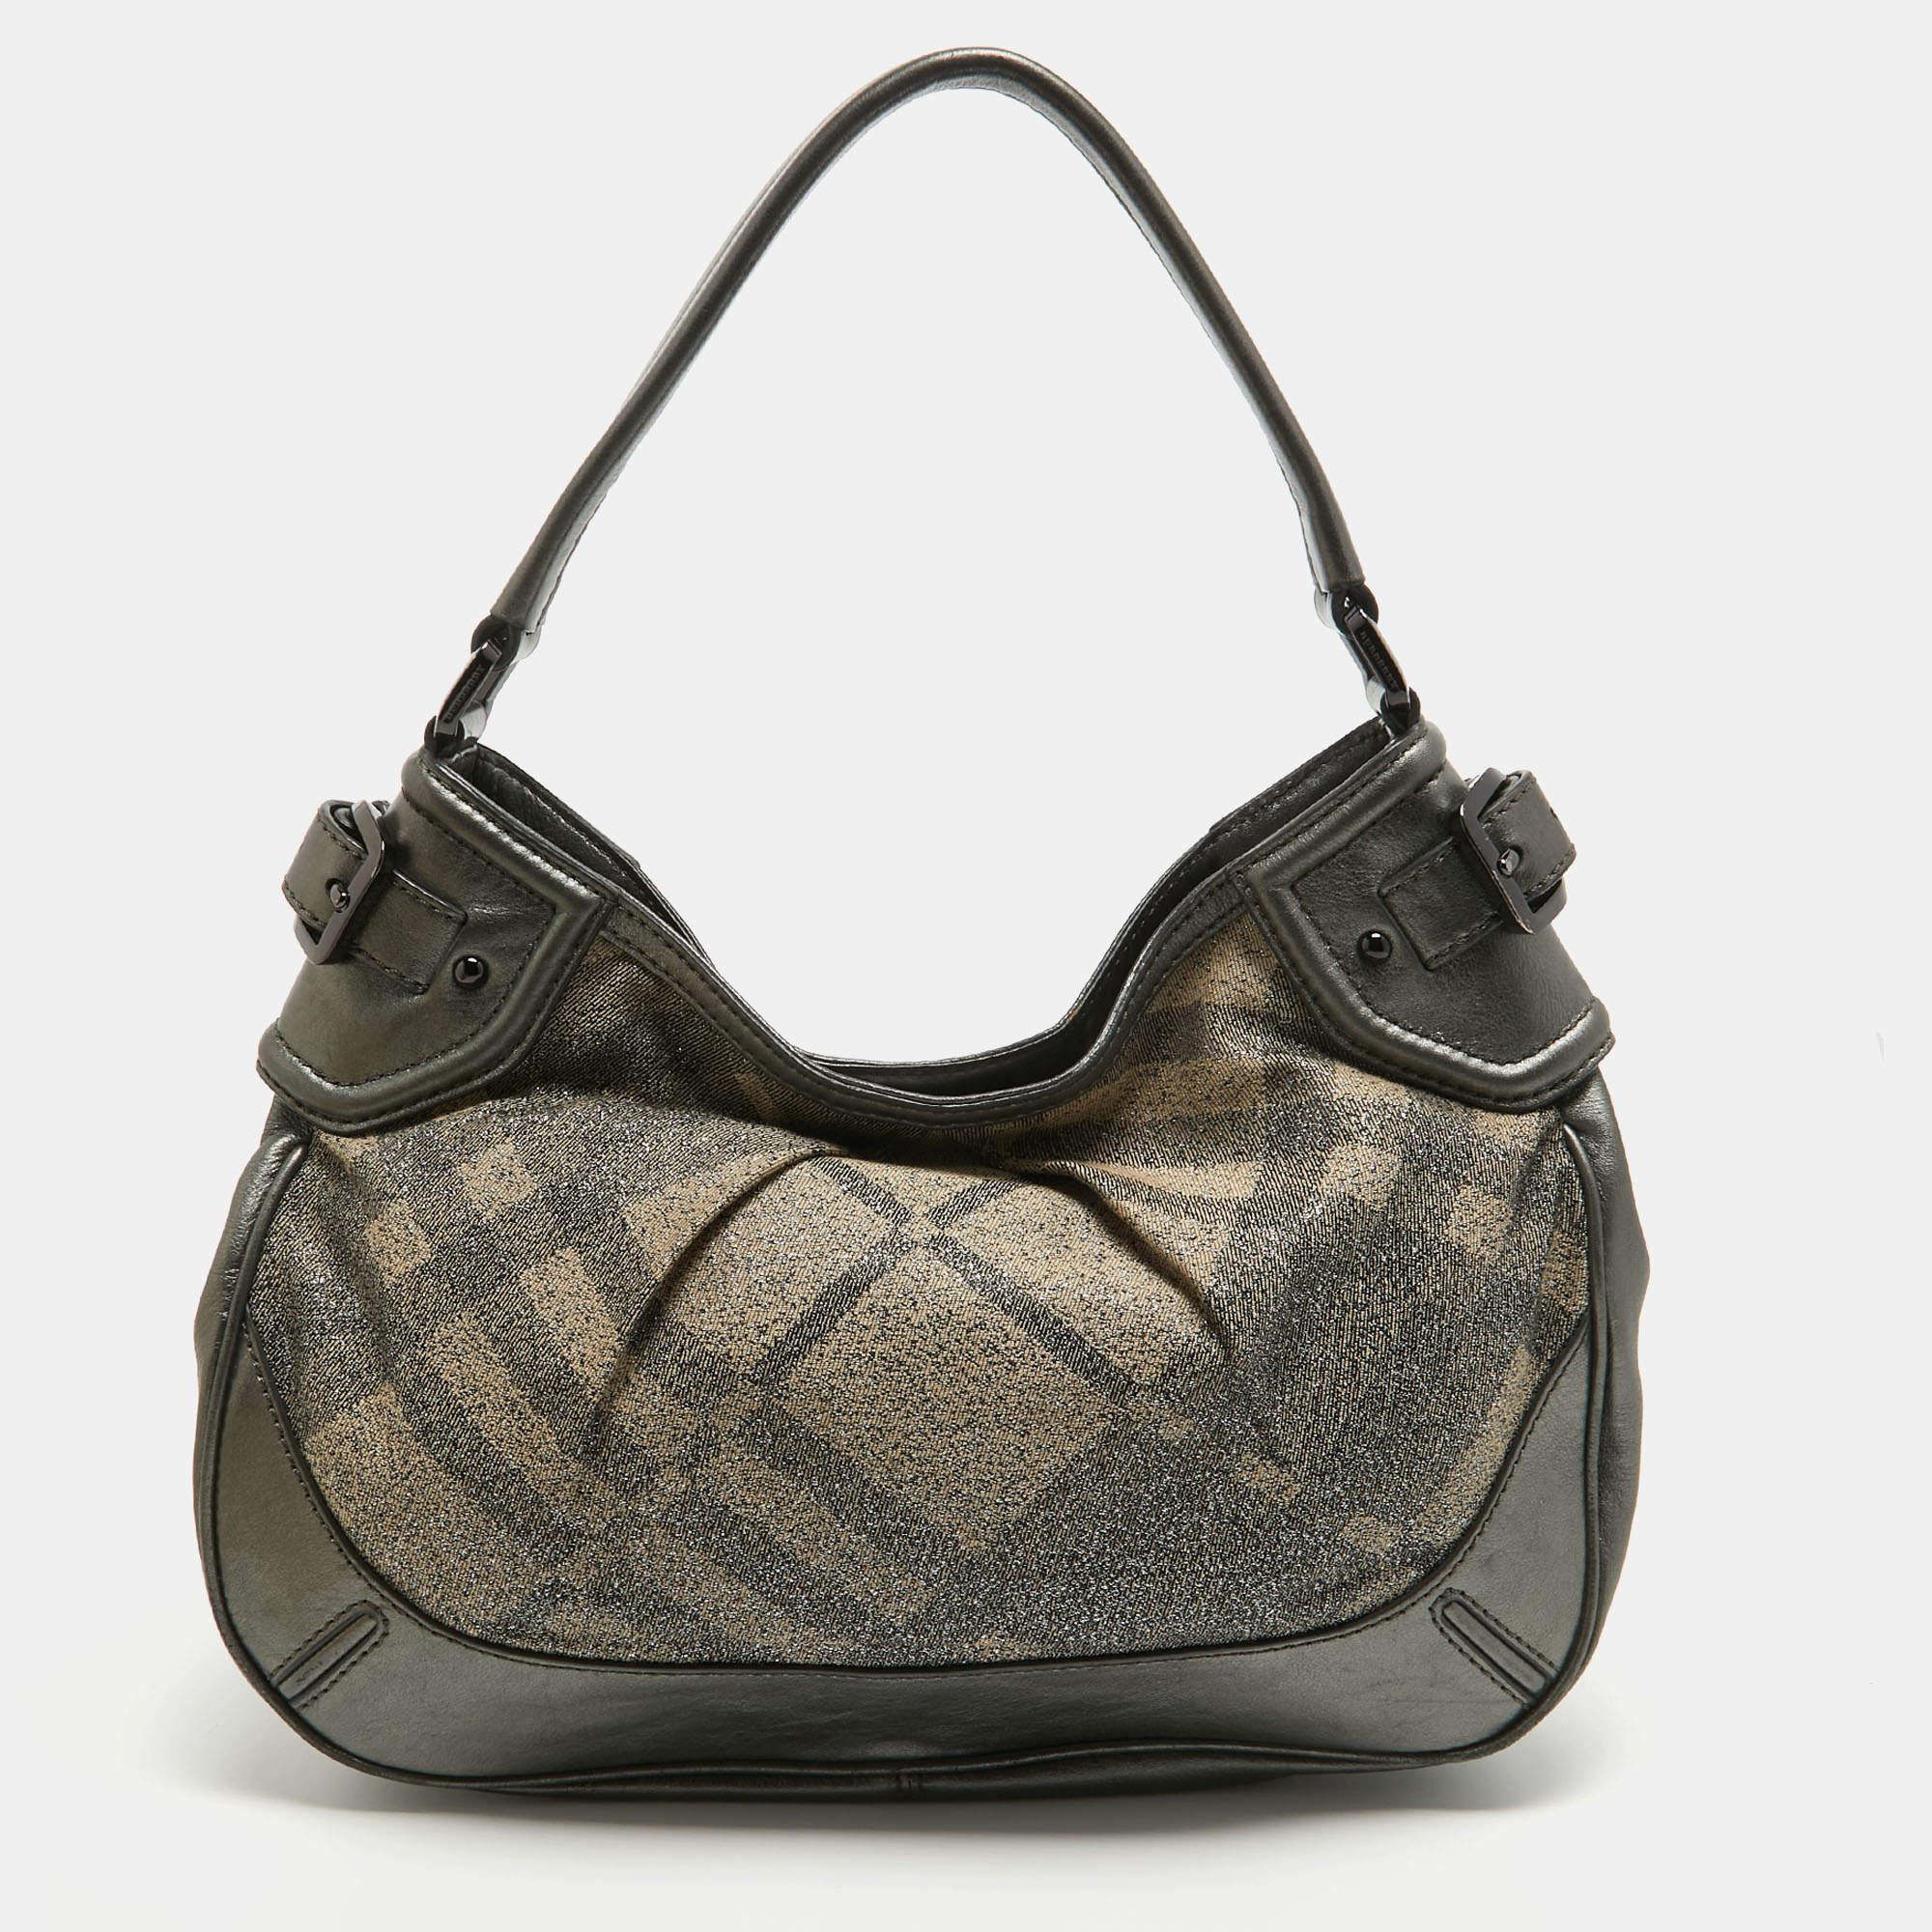 Stylish handbags never fail to make a fashionable impression. Make this designer hobo yours by pairing it with your sophisticated workwear as well as chic casual looks.

Includes: Original Dustbag, Info Booklet, Price Tag

